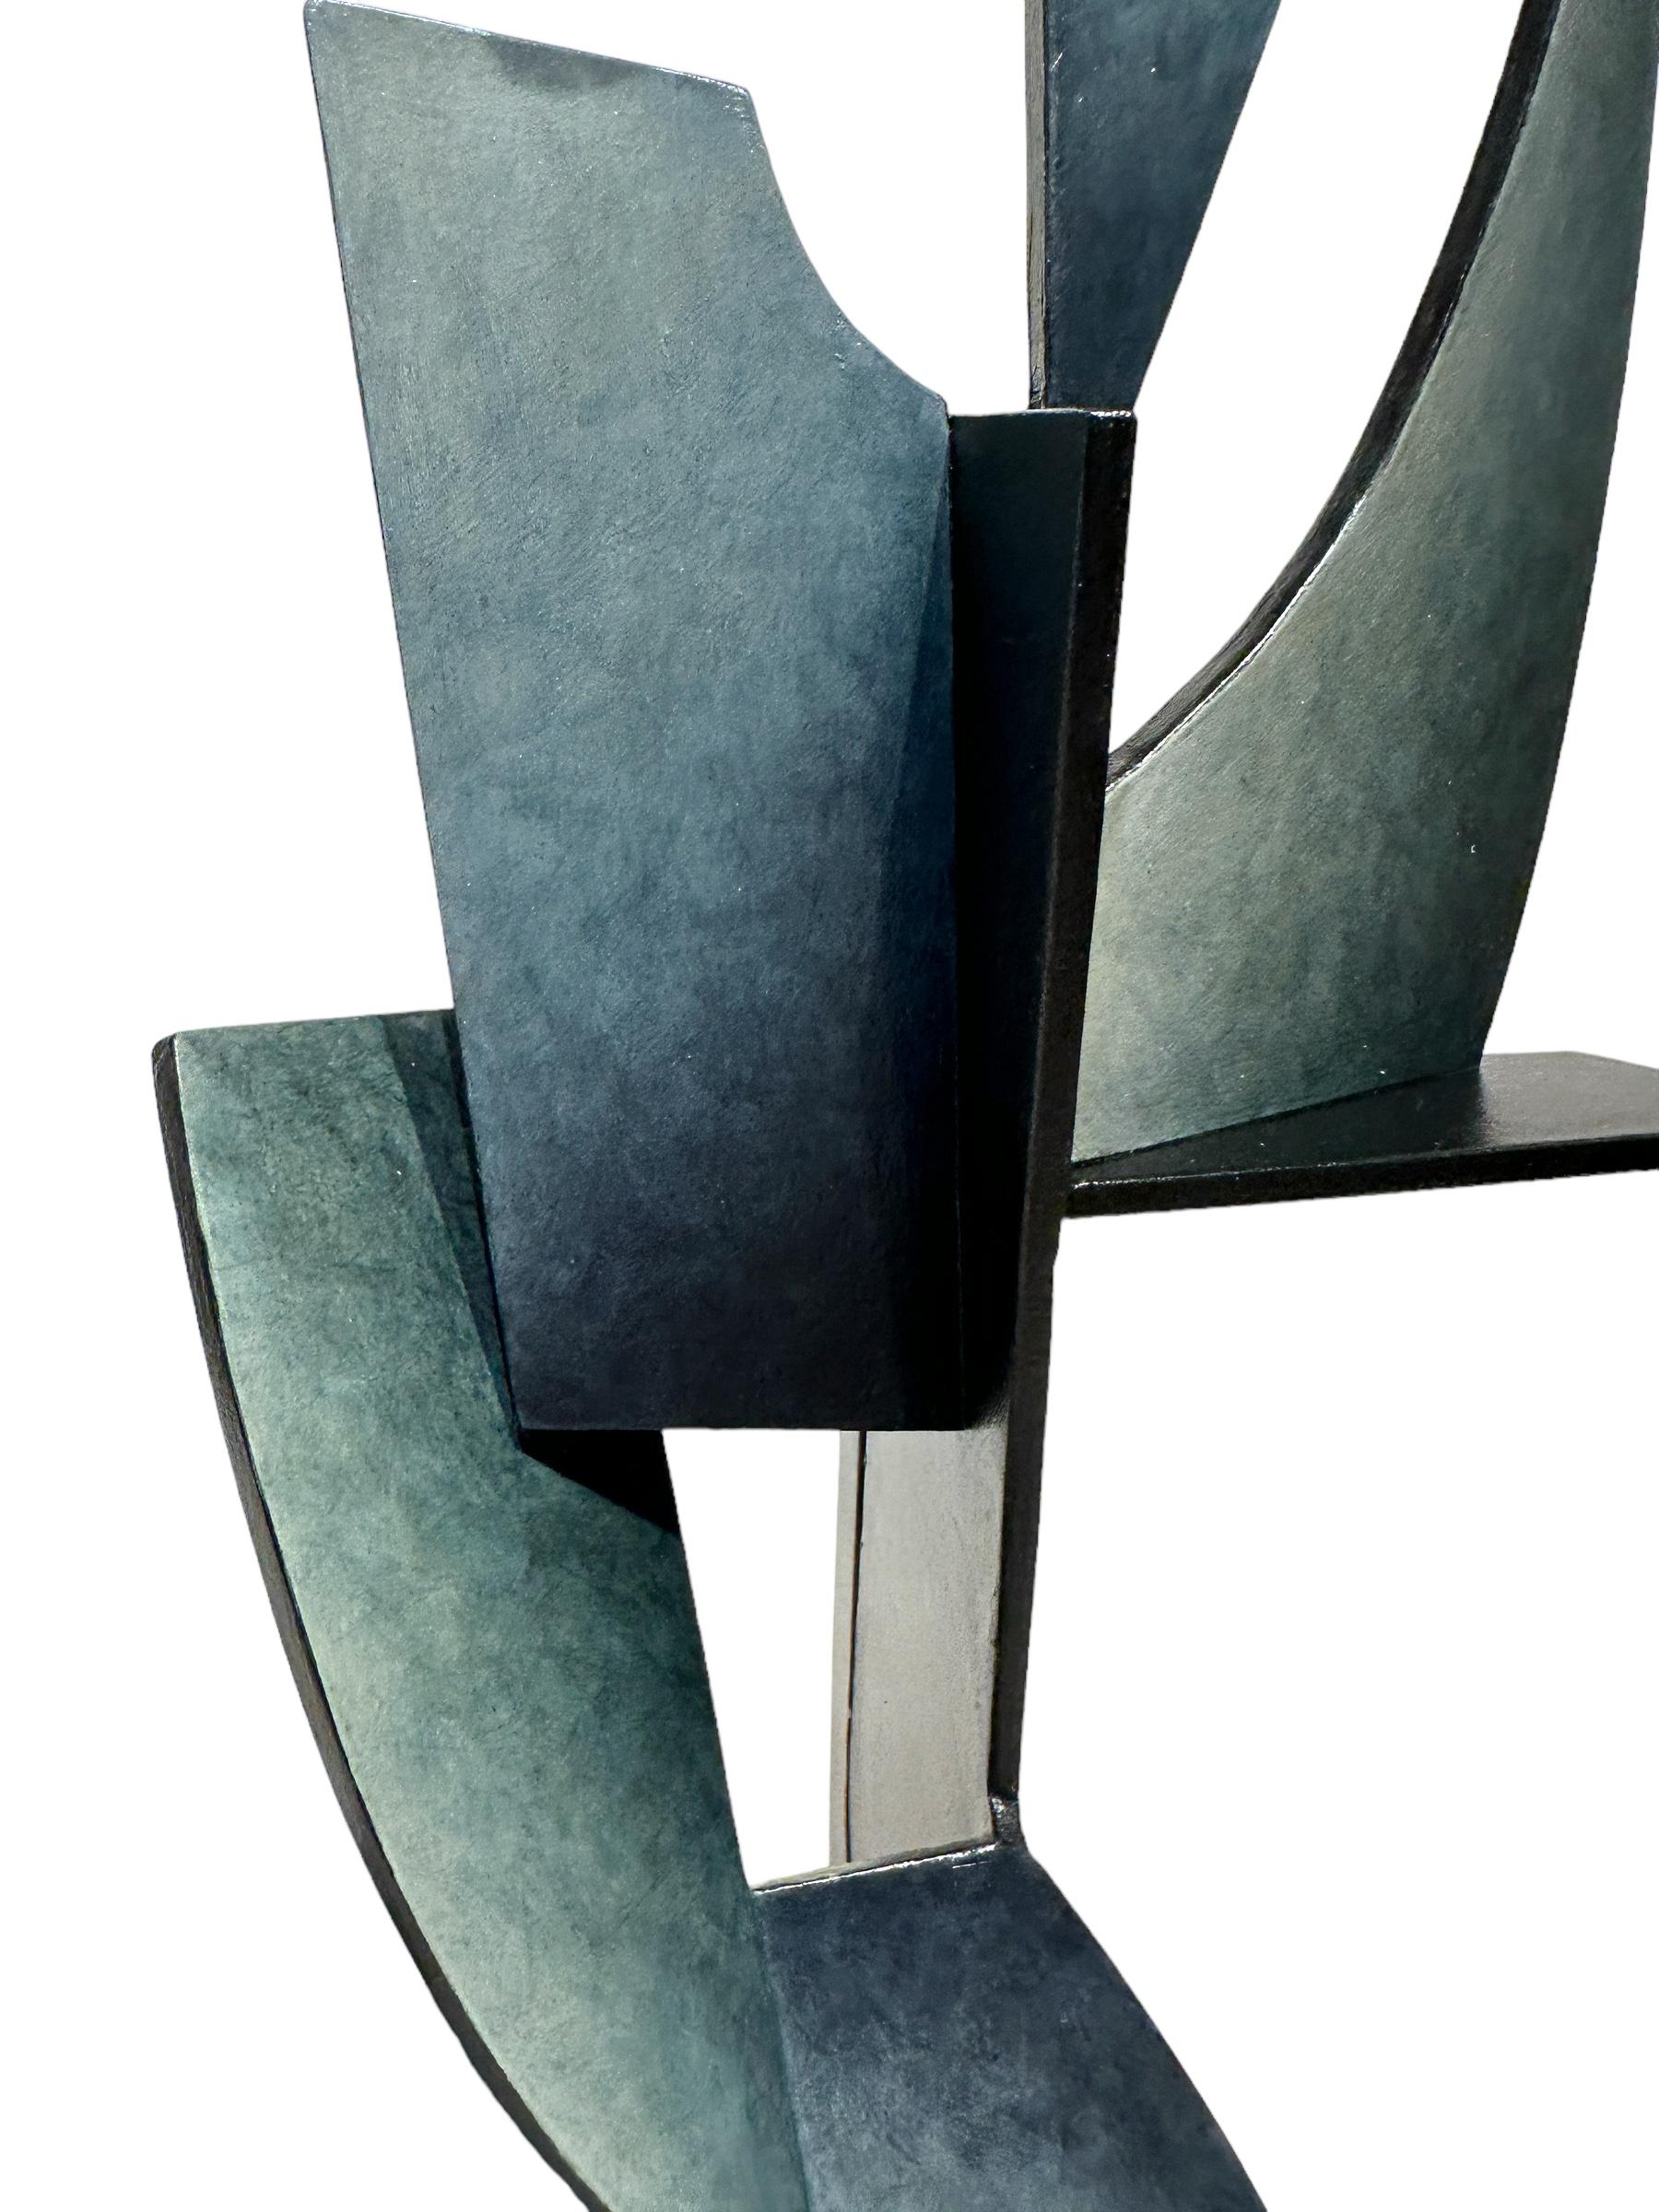 Spirit - Abstract Geometric Form, Hand Painted, Welded Steel Sculpture  For Sale 1